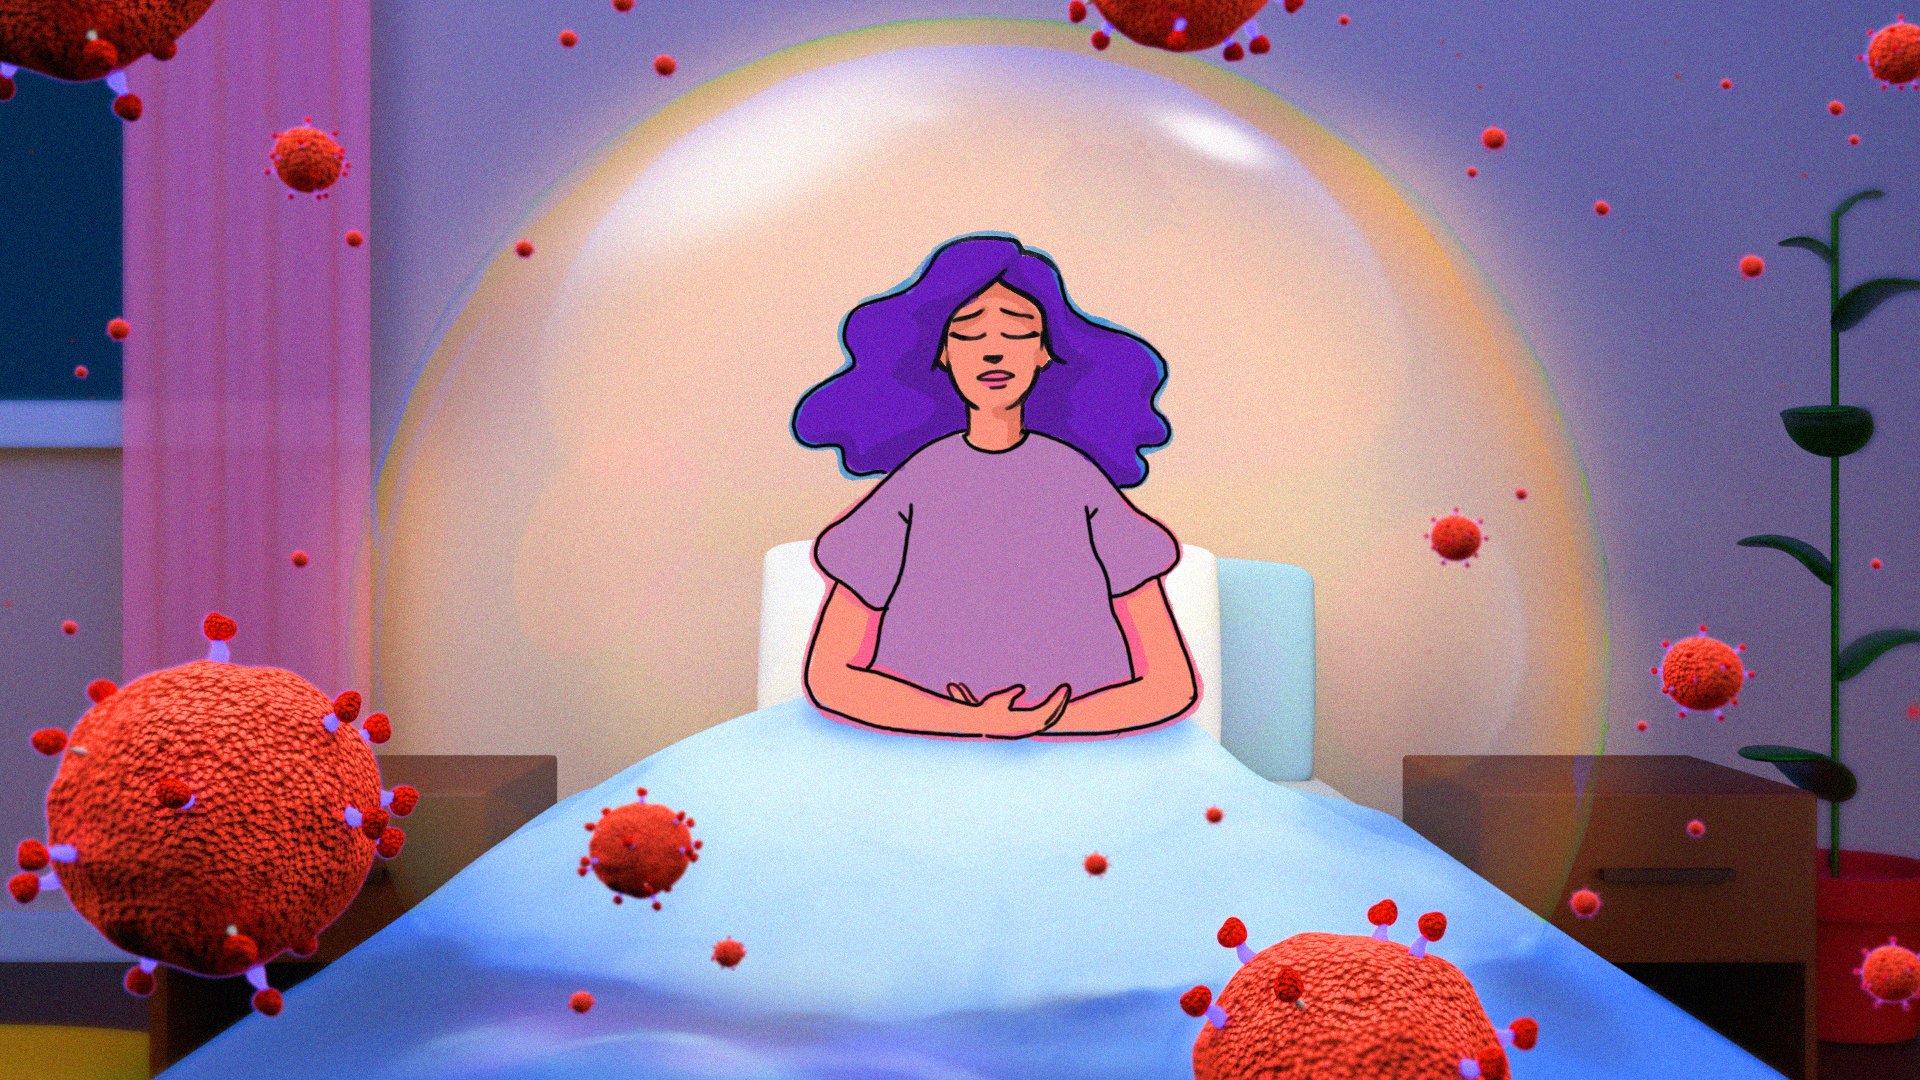 An illustration of a woman sitting upright in bed and meditating while sick with COVID.